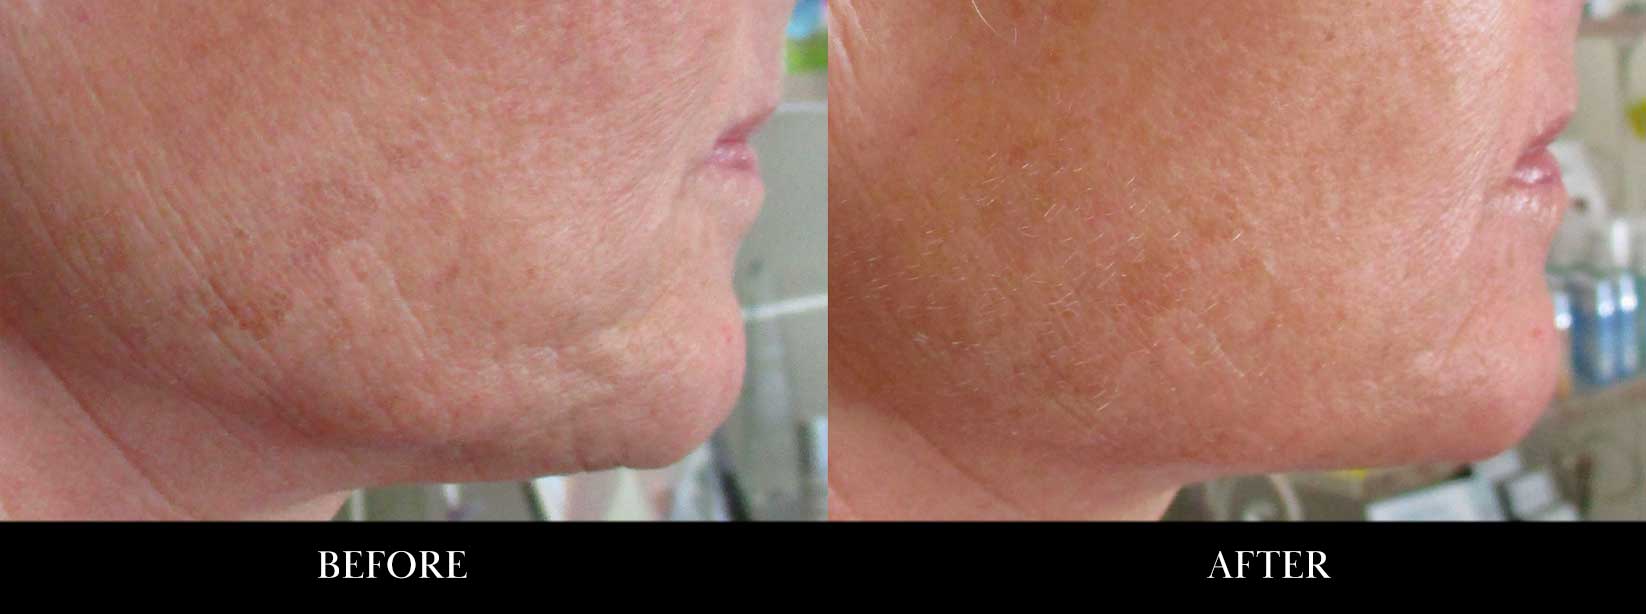 Before and after photos of Secret RF microneedling.